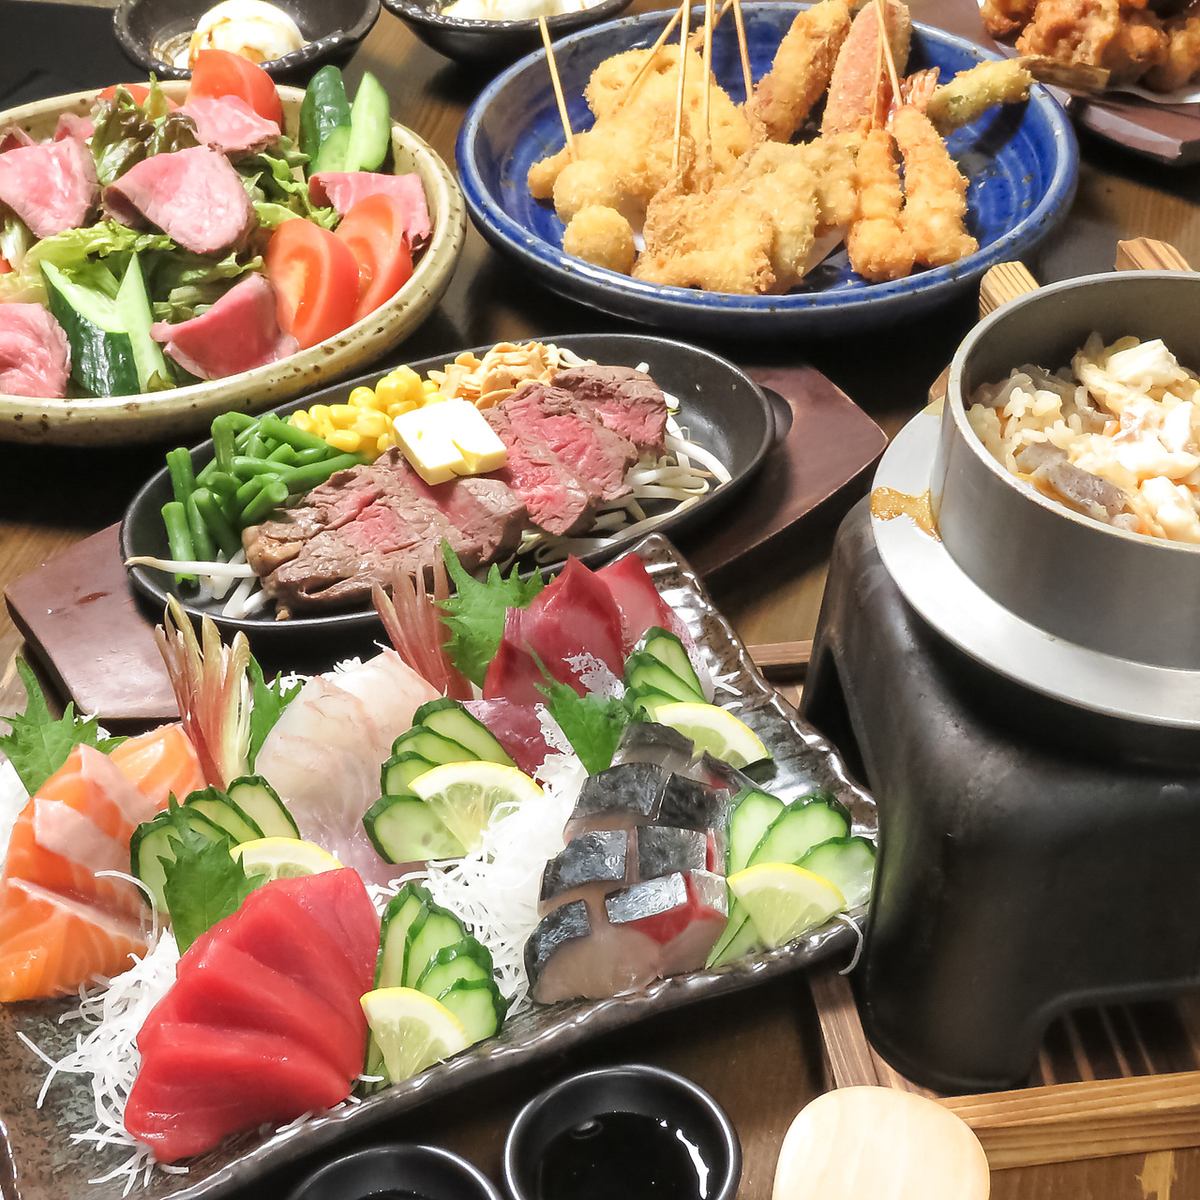 If you're looking for seafood in Takatsuki, head to our restaurant! We take pride in our freshness and prices! All-you-can-drink banquet course starts at 4,400 yen